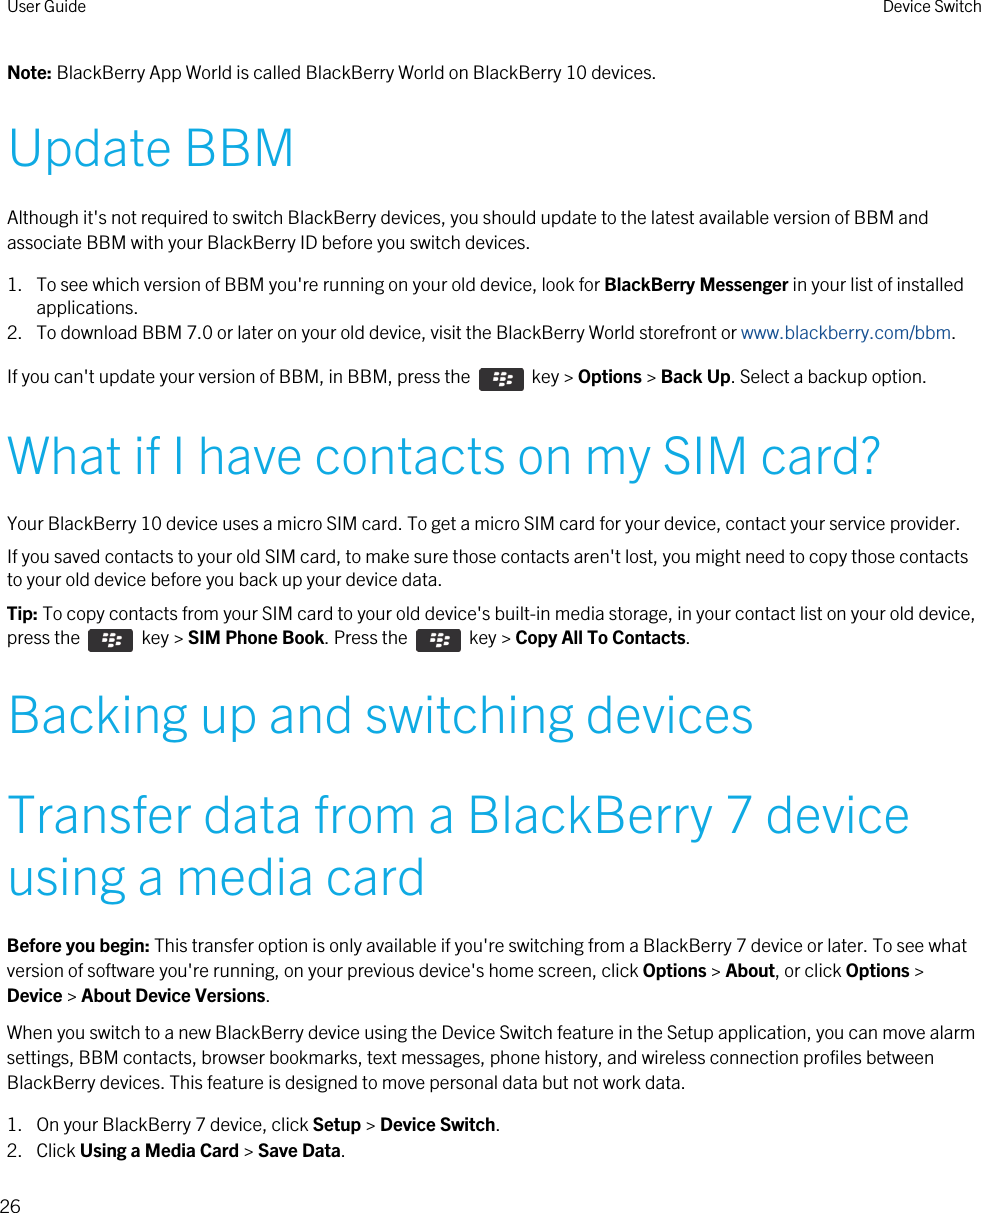 Note: BlackBerry App World is called BlackBerry World on BlackBerry 10 devices.Update BBMAlthough it&apos;s not required to switch BlackBerry devices, you should update to the latest available version of BBM and associate BBM with your BlackBerry ID before you switch devices.1. To see which version of BBM you&apos;re running on your old device, look for BlackBerry Messenger in your list of installed applications.2. To download BBM 7.0 or later on your old device, visit the BlackBerry World storefront or www.blackberry.com/bbm.If you can&apos;t update your version of BBM, in BBM, press the    key &gt; Options &gt; Back Up. Select a backup option.What if I have contacts on my SIM card?Your BlackBerry 10 device uses a micro SIM card. To get a micro SIM card for your device, contact your service provider.If you saved contacts to your old SIM card, to make sure those contacts aren&apos;t lost, you might need to copy those contacts to your old device before you back up your device data.Tip: To copy contacts from your SIM card to your old device&apos;s built-in media storage, in your contact list on your old device, press the    key &gt; SIM Phone Book. Press the    key &gt; Copy All To Contacts.Backing up and switching devicesTransfer data from a BlackBerry 7 device using a media cardBefore you begin: This transfer option is only available if you&apos;re switching from a BlackBerry 7 device or later. To see what version of software you&apos;re running, on your previous device&apos;s home screen, click Options &gt; About, or click Options &gt; Device &gt; About Device Versions.When you switch to a new BlackBerry device using the Device Switch feature in the Setup application, you can move alarm settings, BBM contacts, browser bookmarks, text messages, phone history, and wireless connection profiles between BlackBerry devices. This feature is designed to move personal data but not work data.1. On your BlackBerry 7 device, click Setup &gt; Device Switch.2. Click Using a Media Card &gt; Save Data.User Guide Device Switch26 